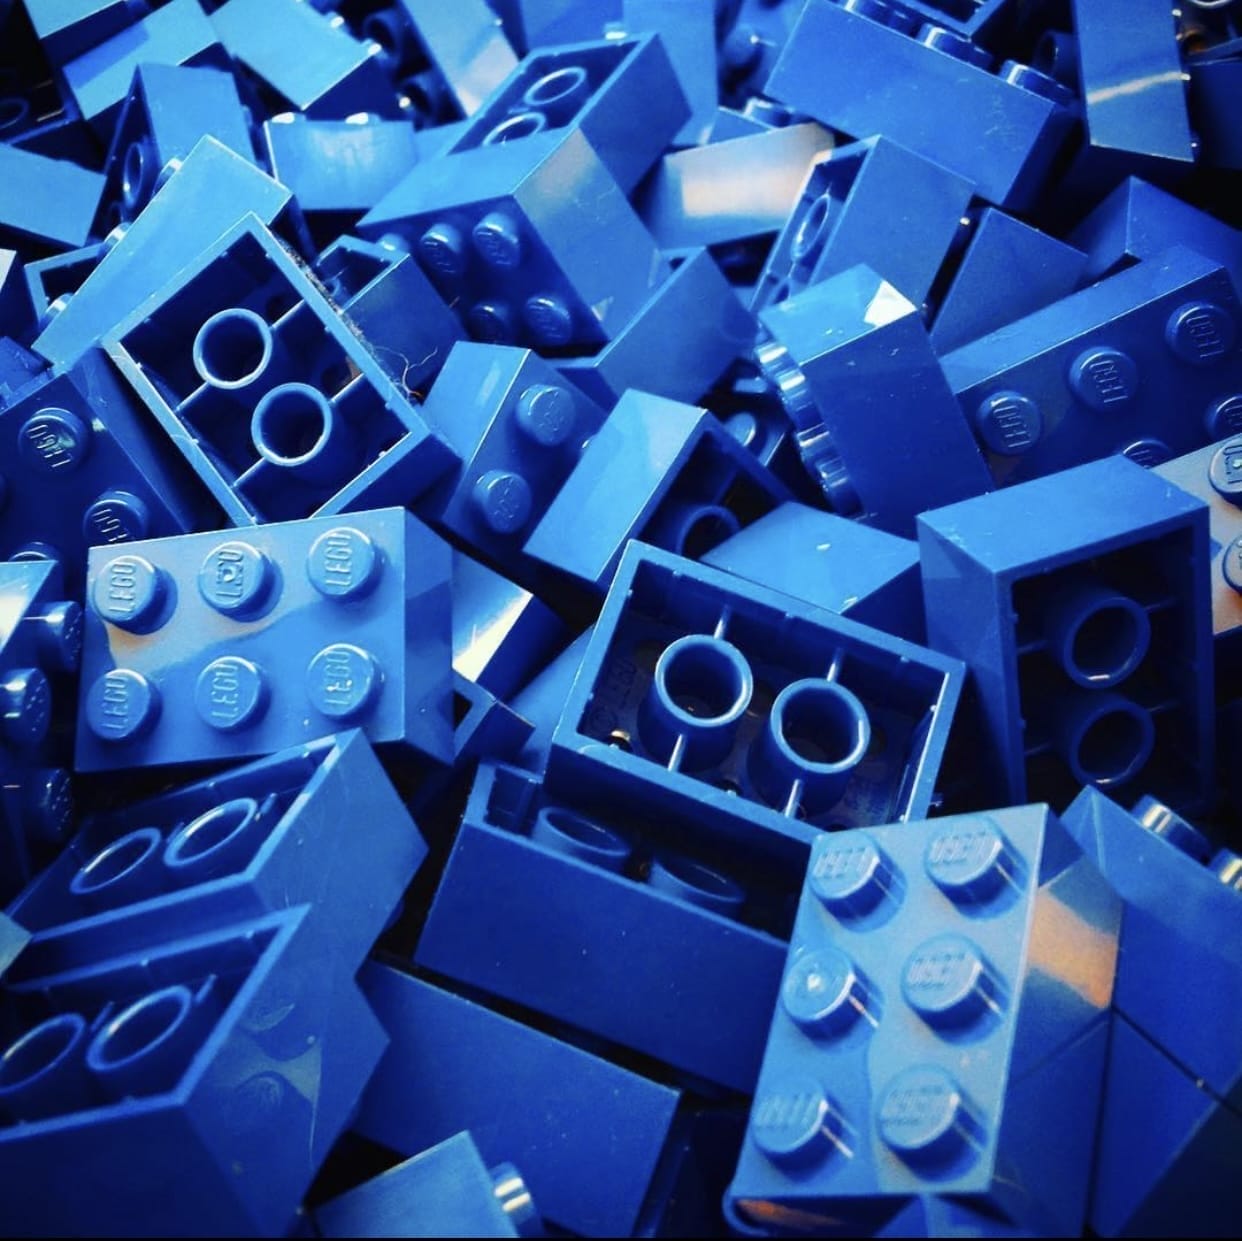 Bright blue Legos fill the complete field of view.